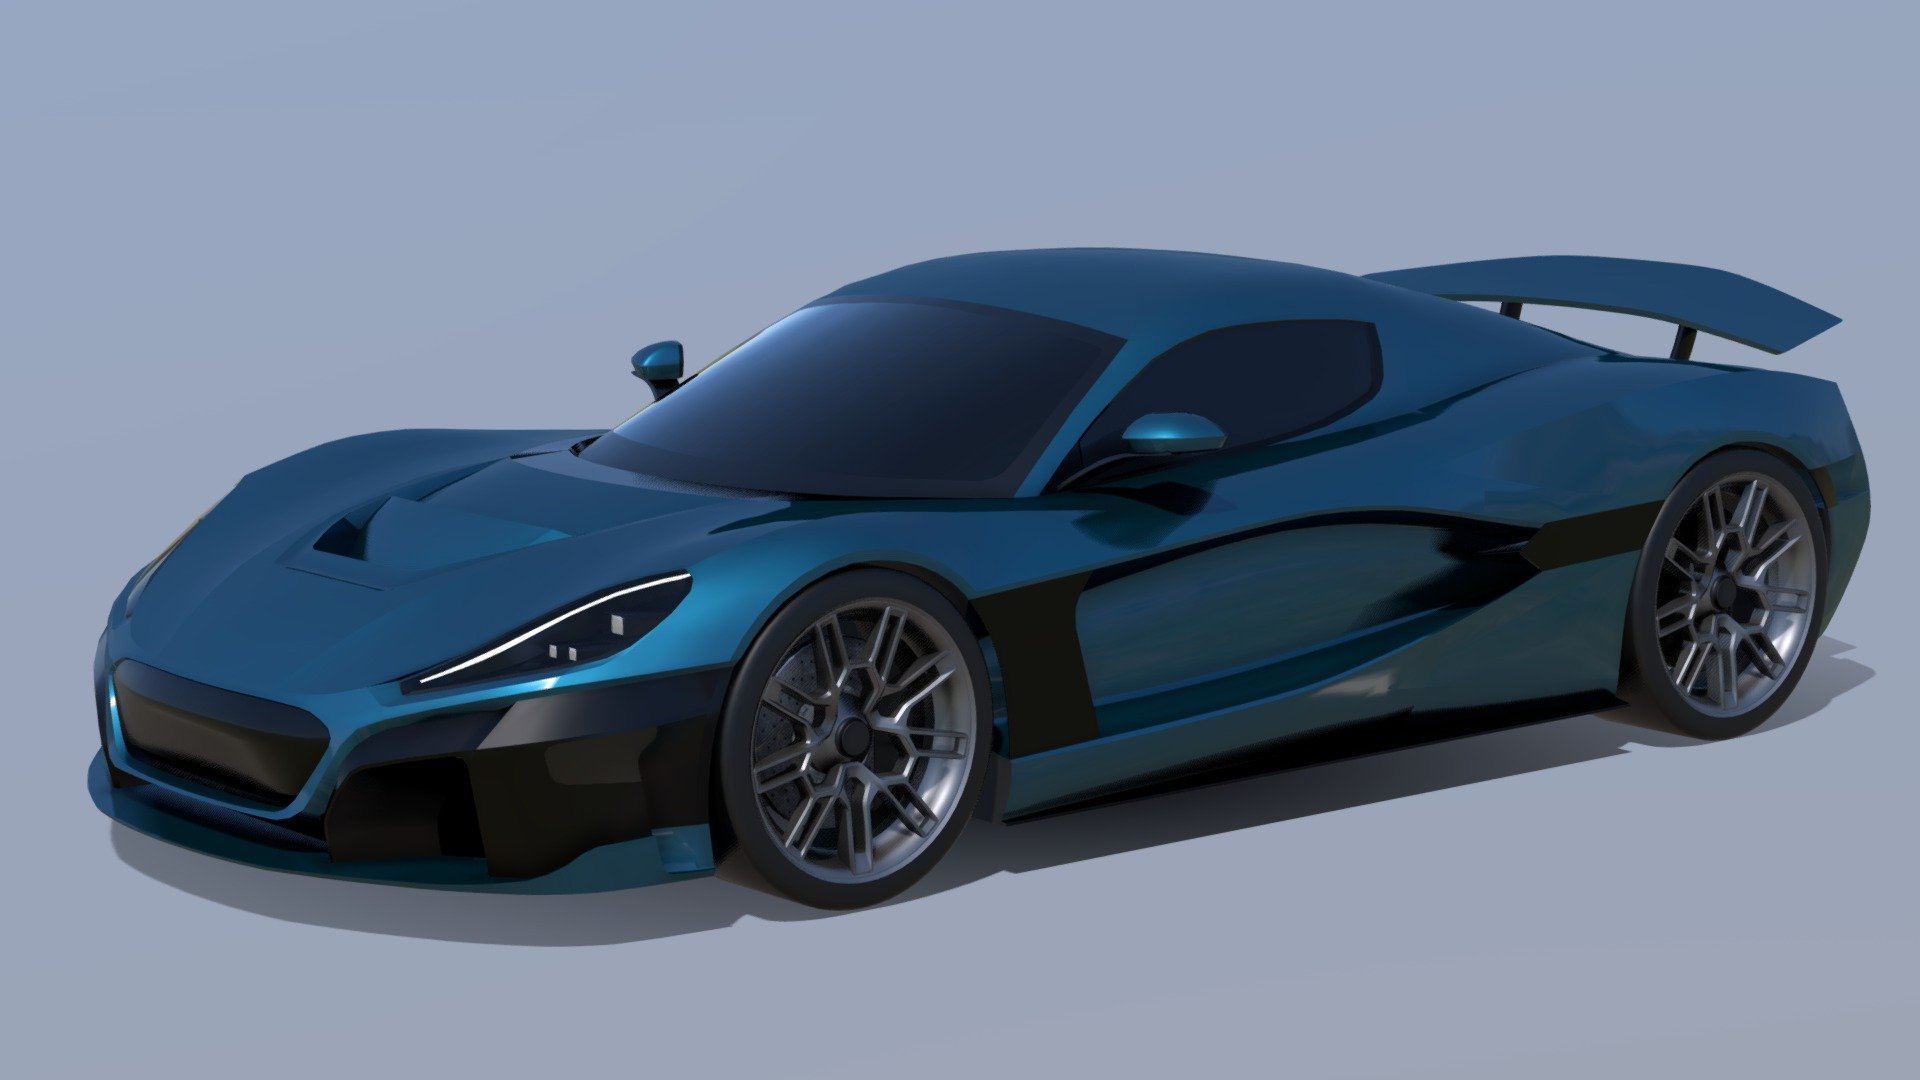 worlds fastest production electric car ! nice

very cool car

&lt;20k tris without wheels - 2022 Rimac Nevera - 3D model by veratech 3d model